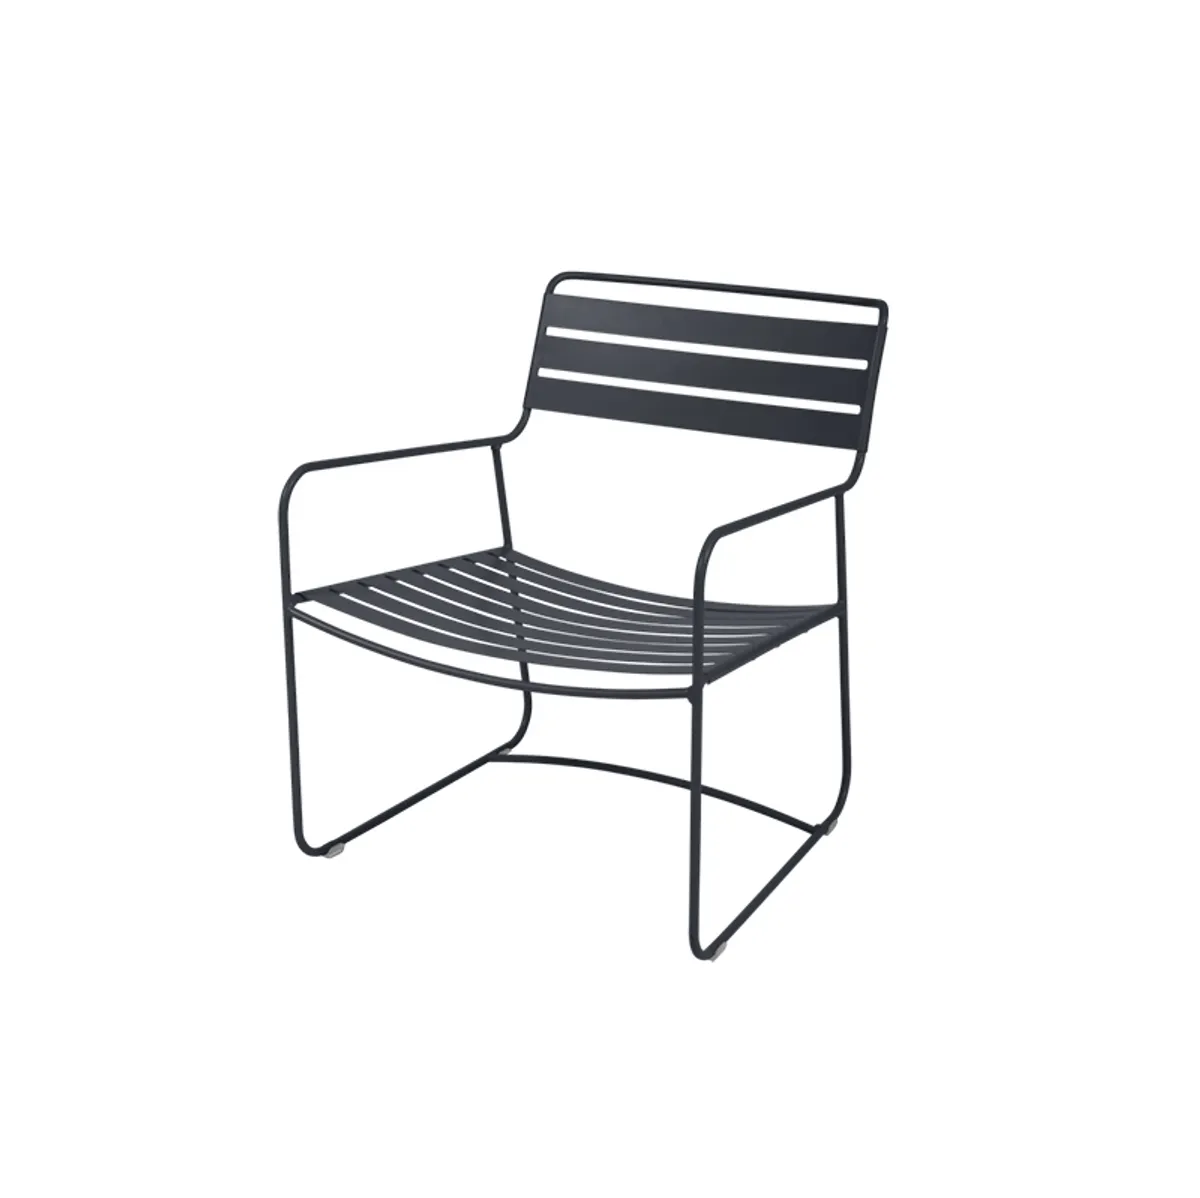 Surprising Outdoor Lounge Chair Inside Out Contracts Black